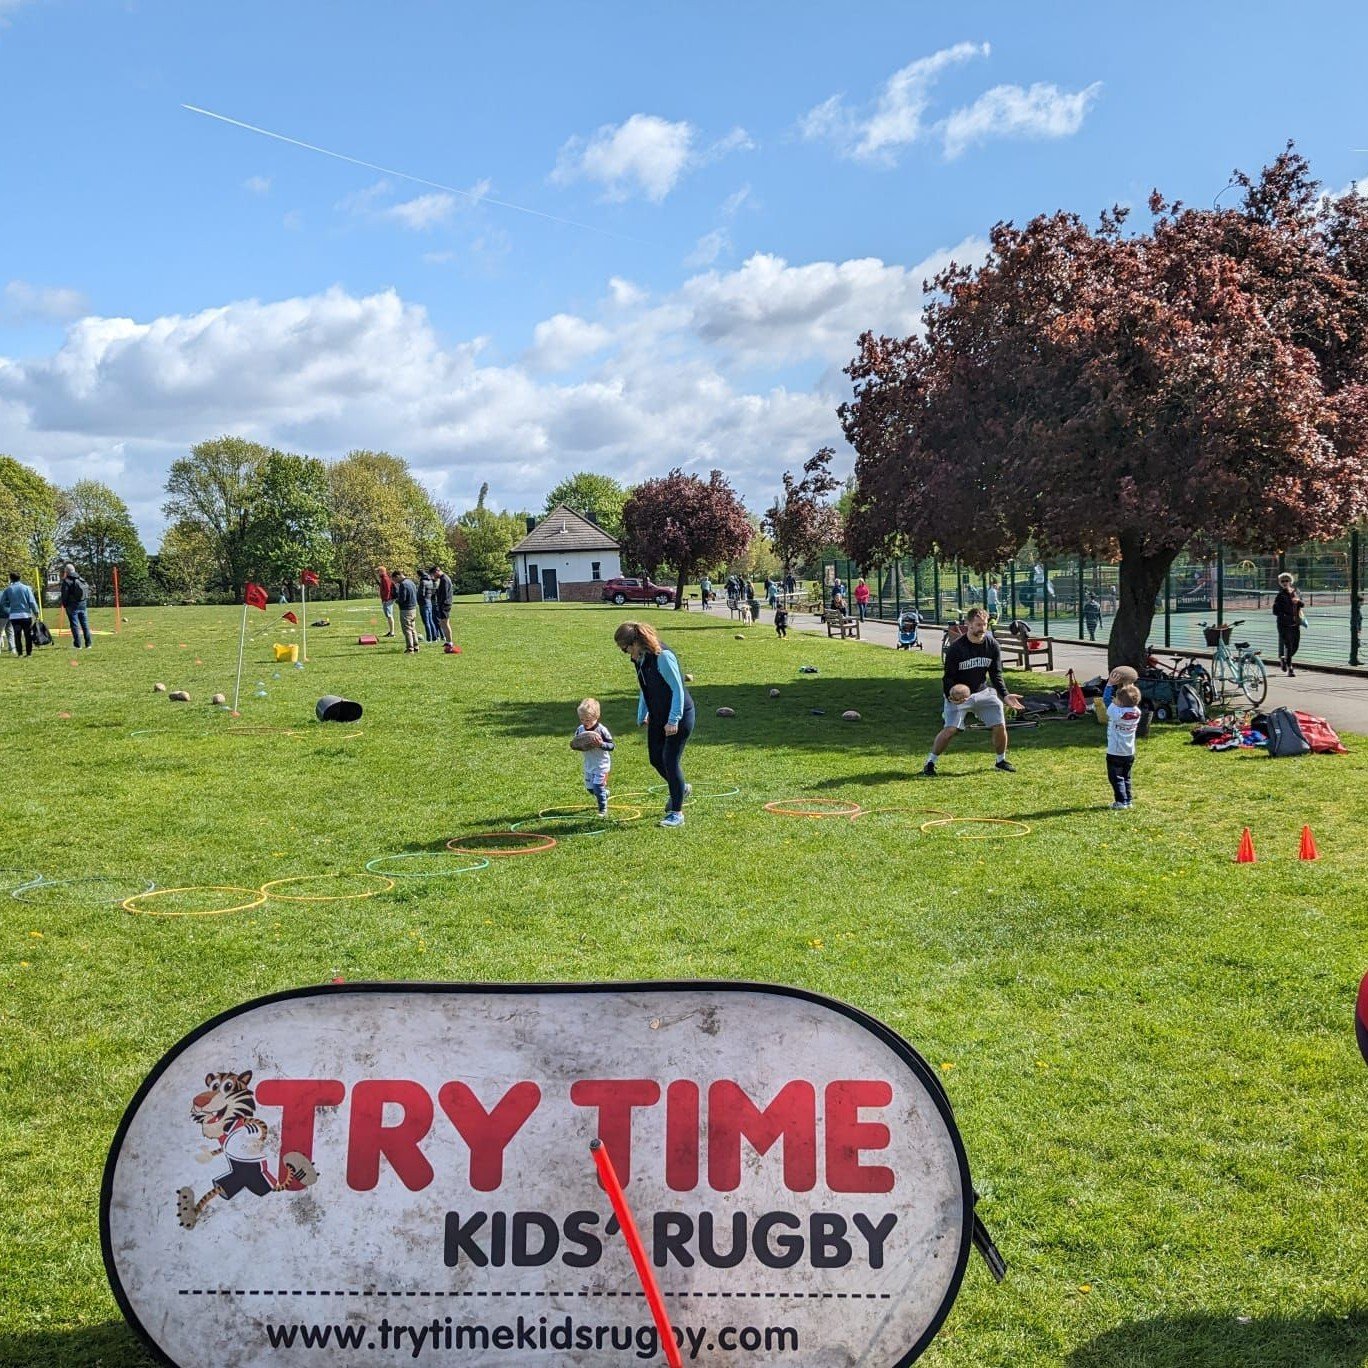 It's been great welcoming everyone back for the summer term 👋😎 How good is rugby in the sunshine ☀️❤️ Our Try Timers definitely earned a rest after all that activity - comfy there on the rugby balls?! 🤔😄

#trytime #kidsrugby #tagrugby #twickenham